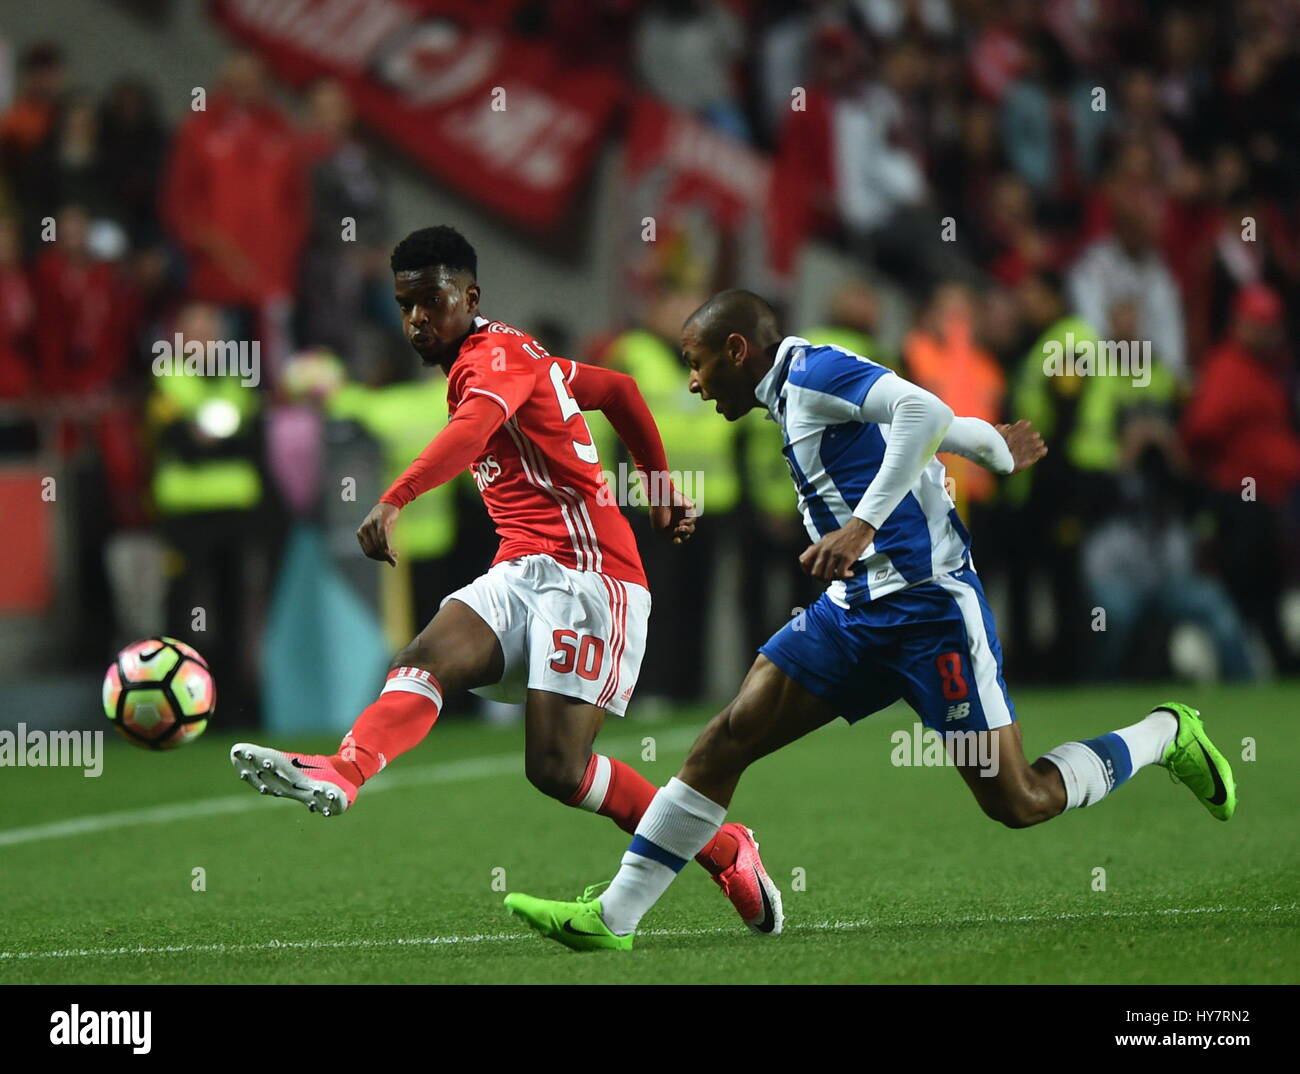 Lisbon, Portugal. 1st Apr, 2017. Benfica's Nelson Semedo (L) vies with Porto's Yacine Brahimi during the Portuguese League soccer match at Luz stadium in Lisbon, Portugal, April 1, 2017. The match ended 1-1. Credit: Zhang Liyun/Xinhua/Alamy Live News Stock Photo